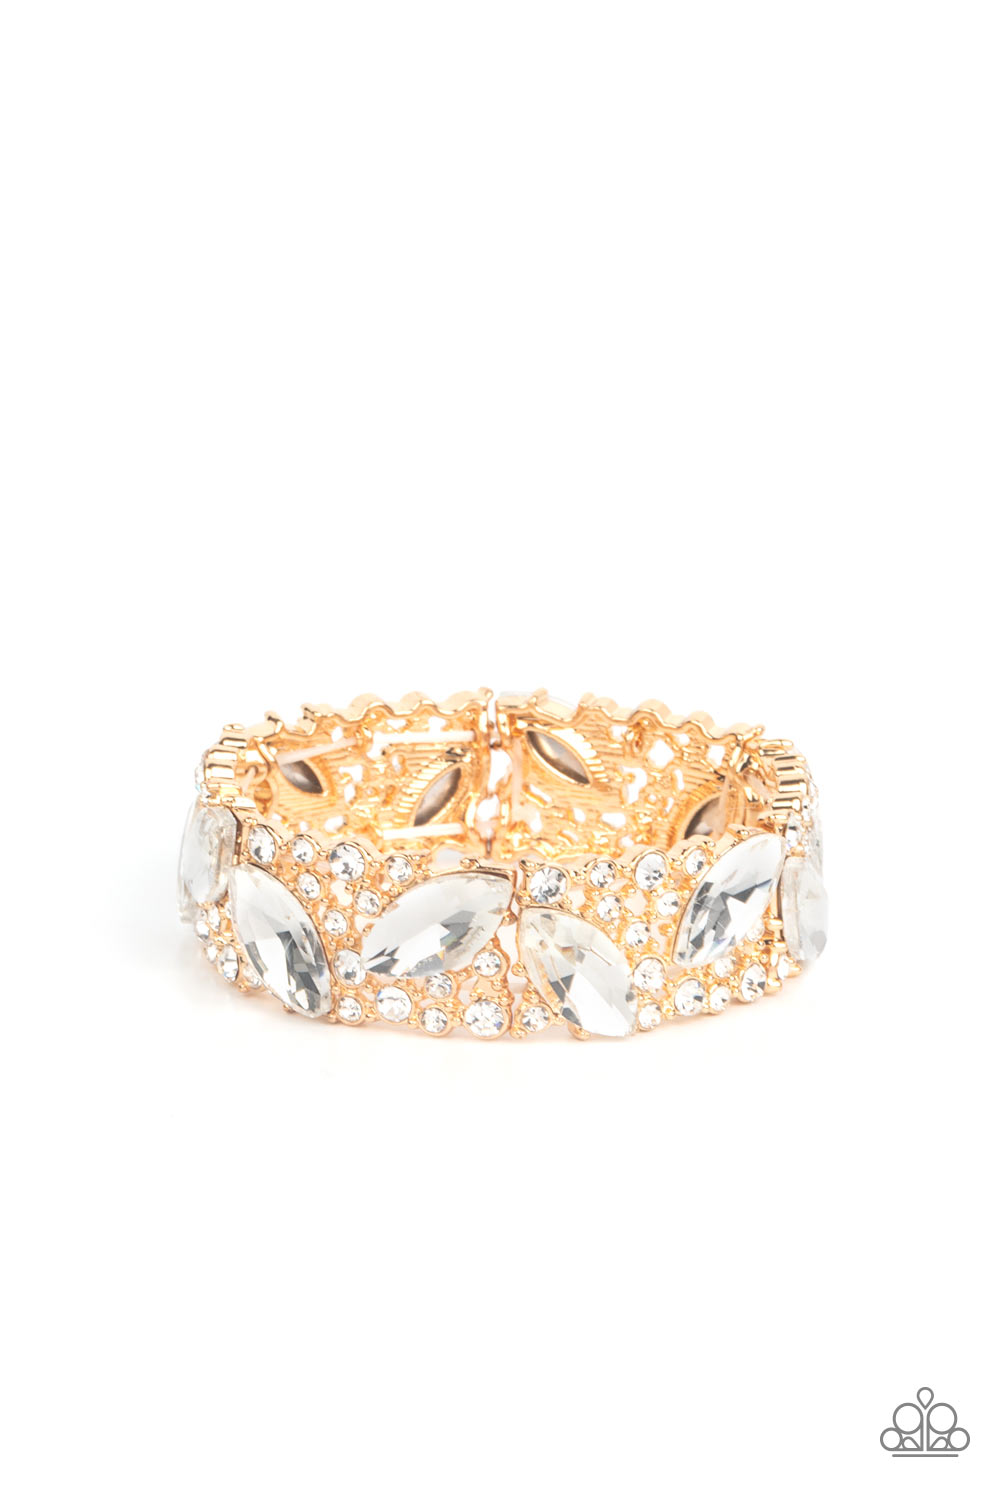 Oversized marquise cut white rhinestones sparkle atop icy frames of dainty gold studs